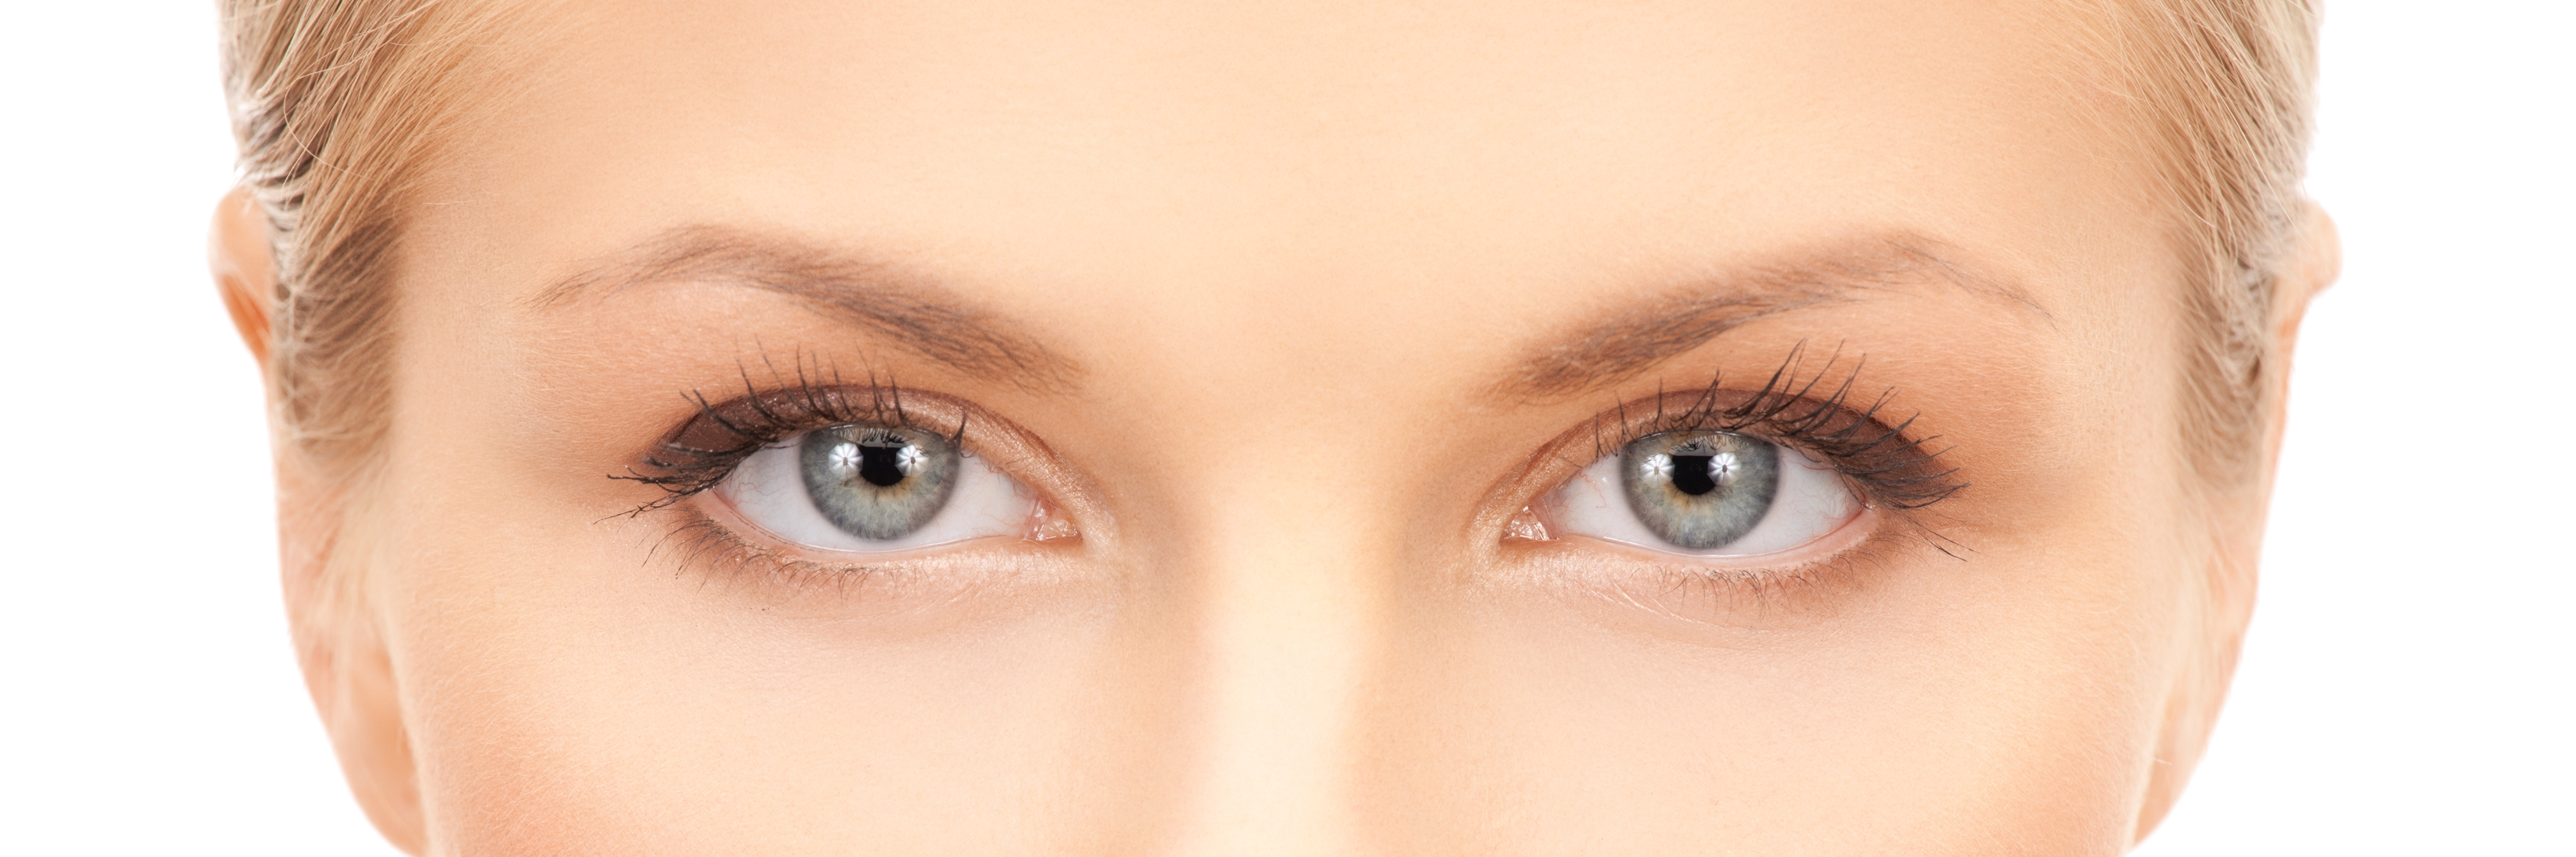 laser treatment in Valparaiso, IN | DeLaine Anti-Aging & Cosmetic Eye Surgery